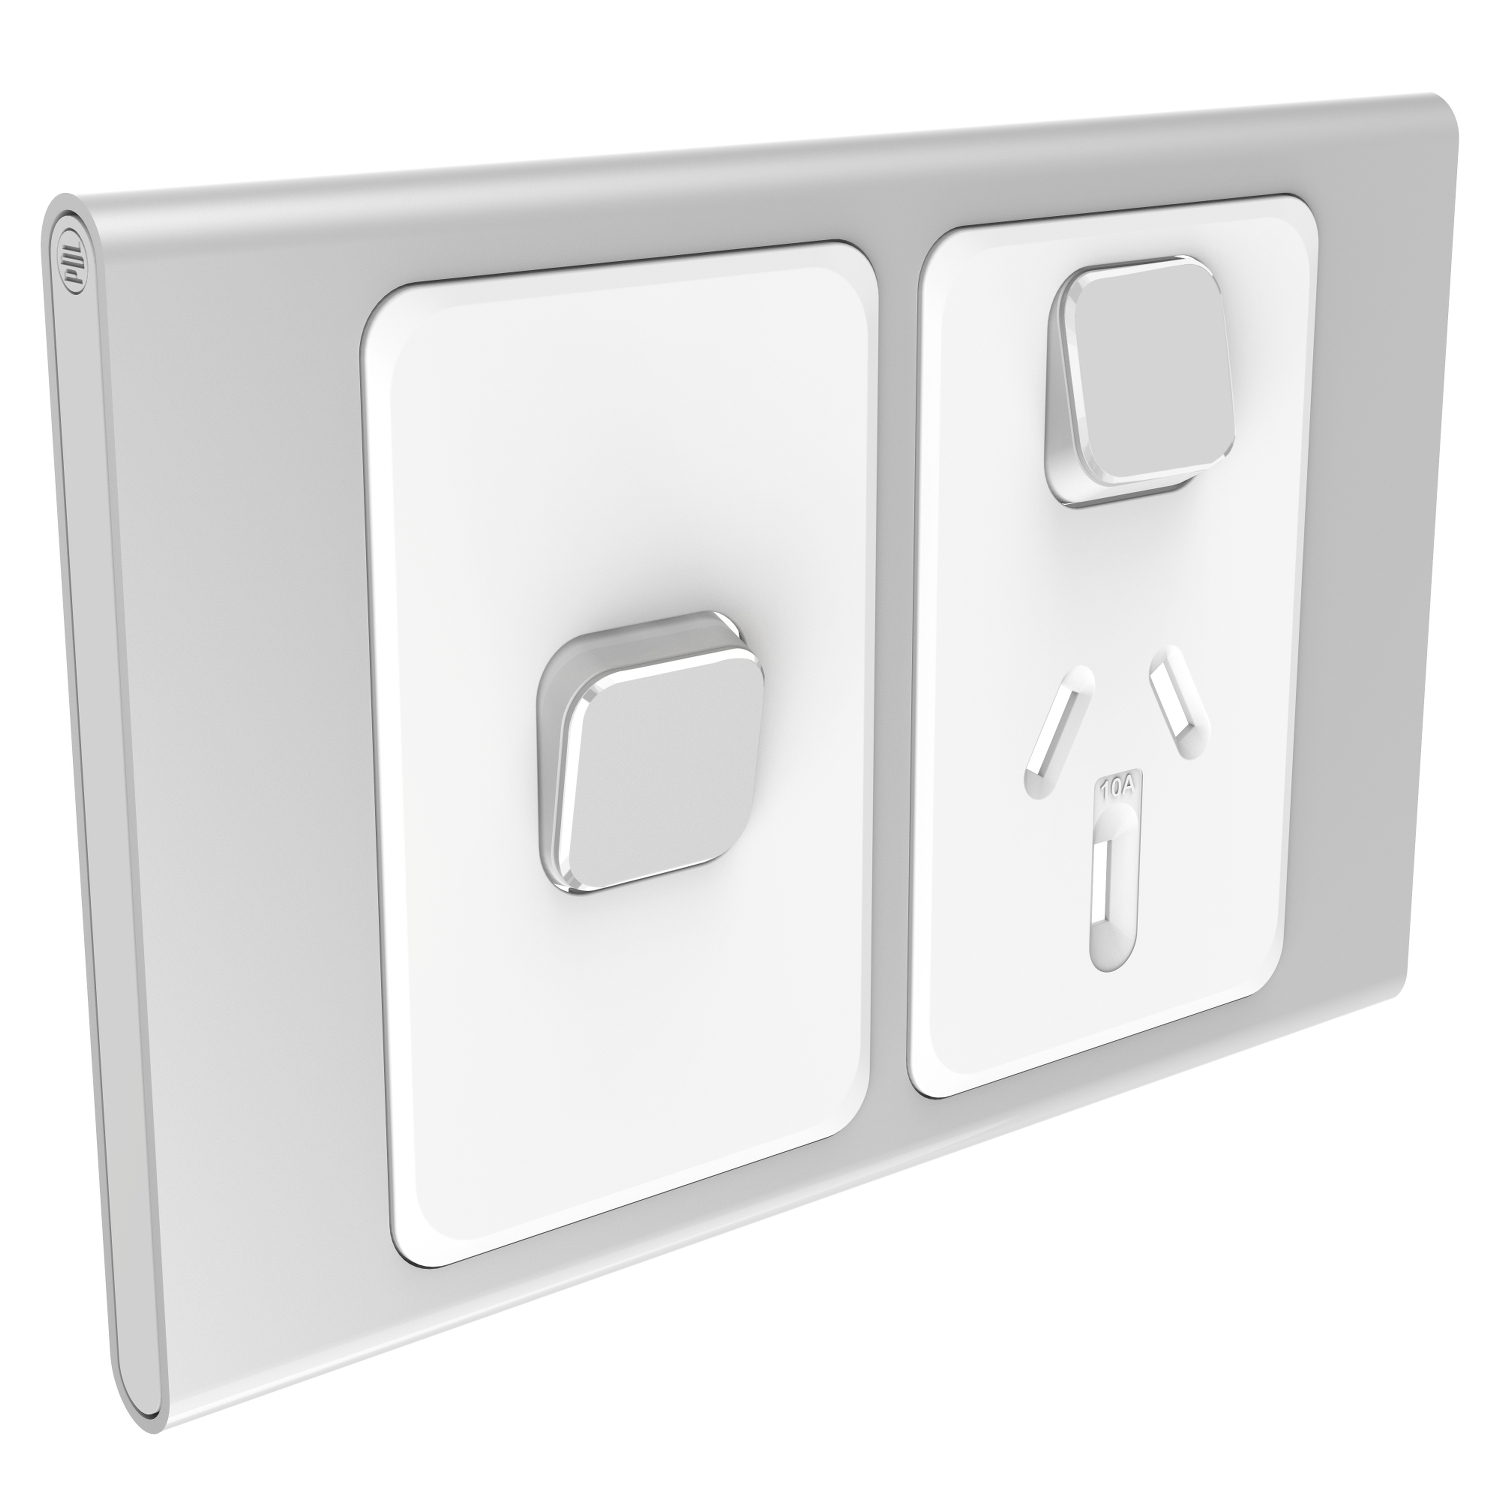 PDL Iconic Styl, cover frame, 2 switches & 1 socket, horizontal - Silver 